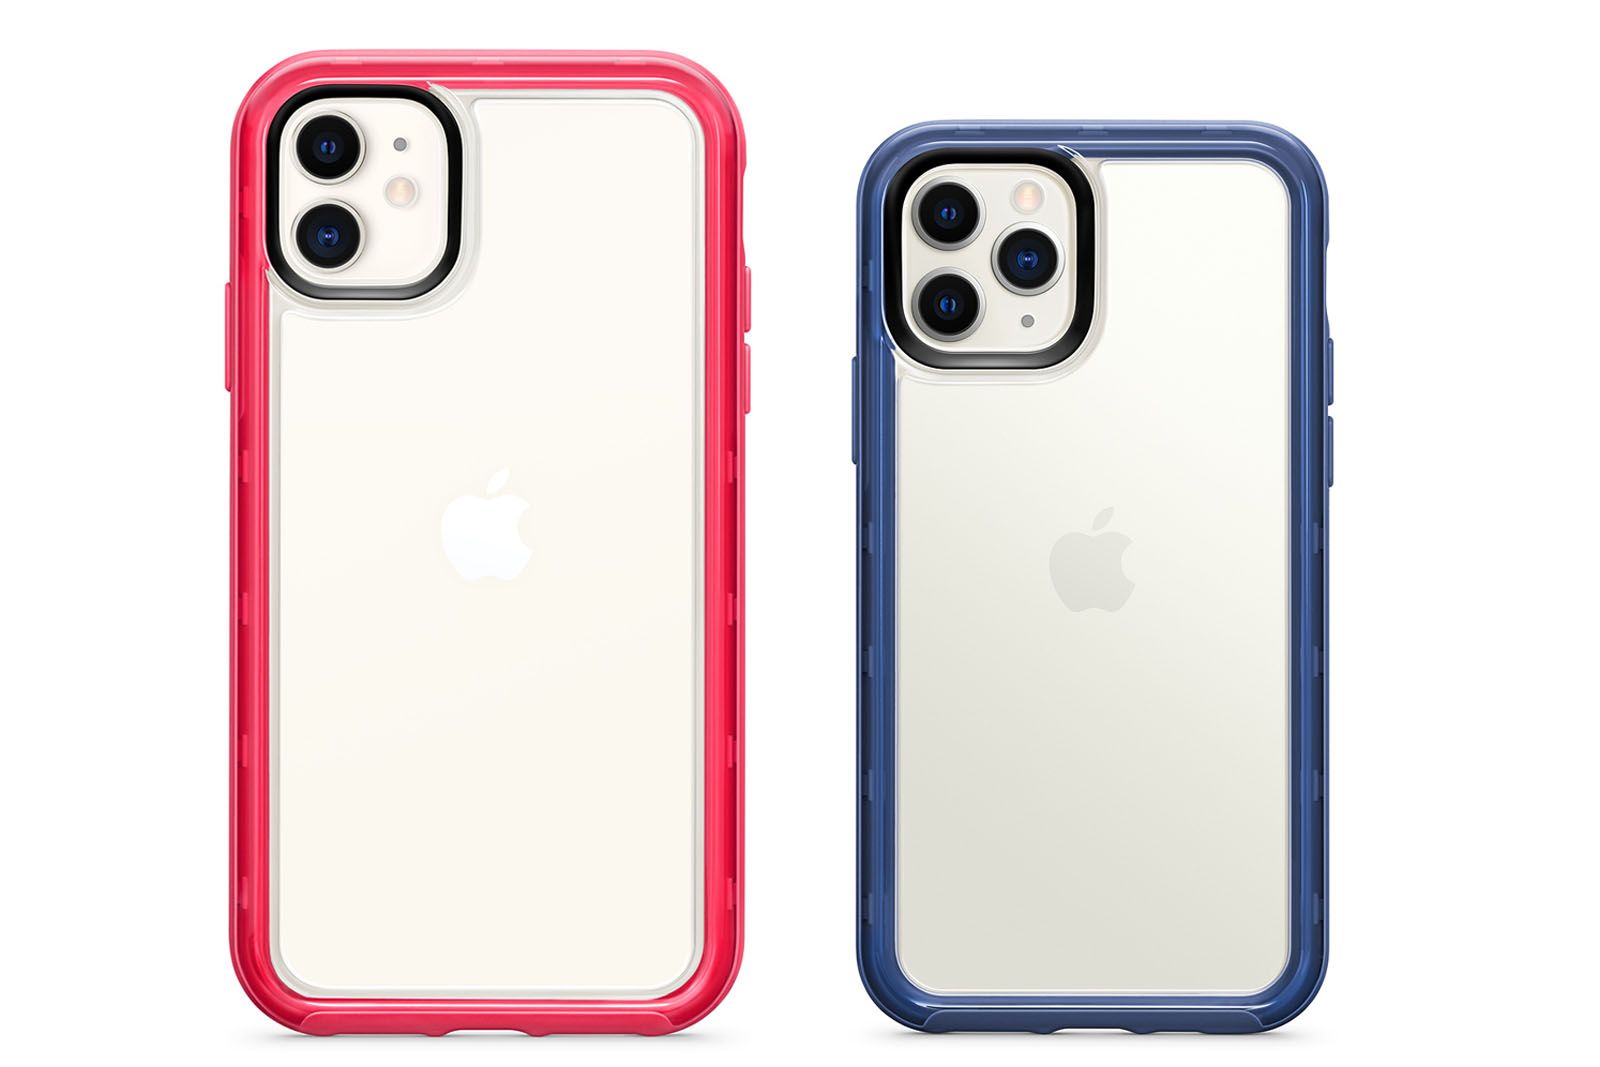 Best iPhone 11 11 Pro and 11 Pro Max cases Protect your new Apple device image 3